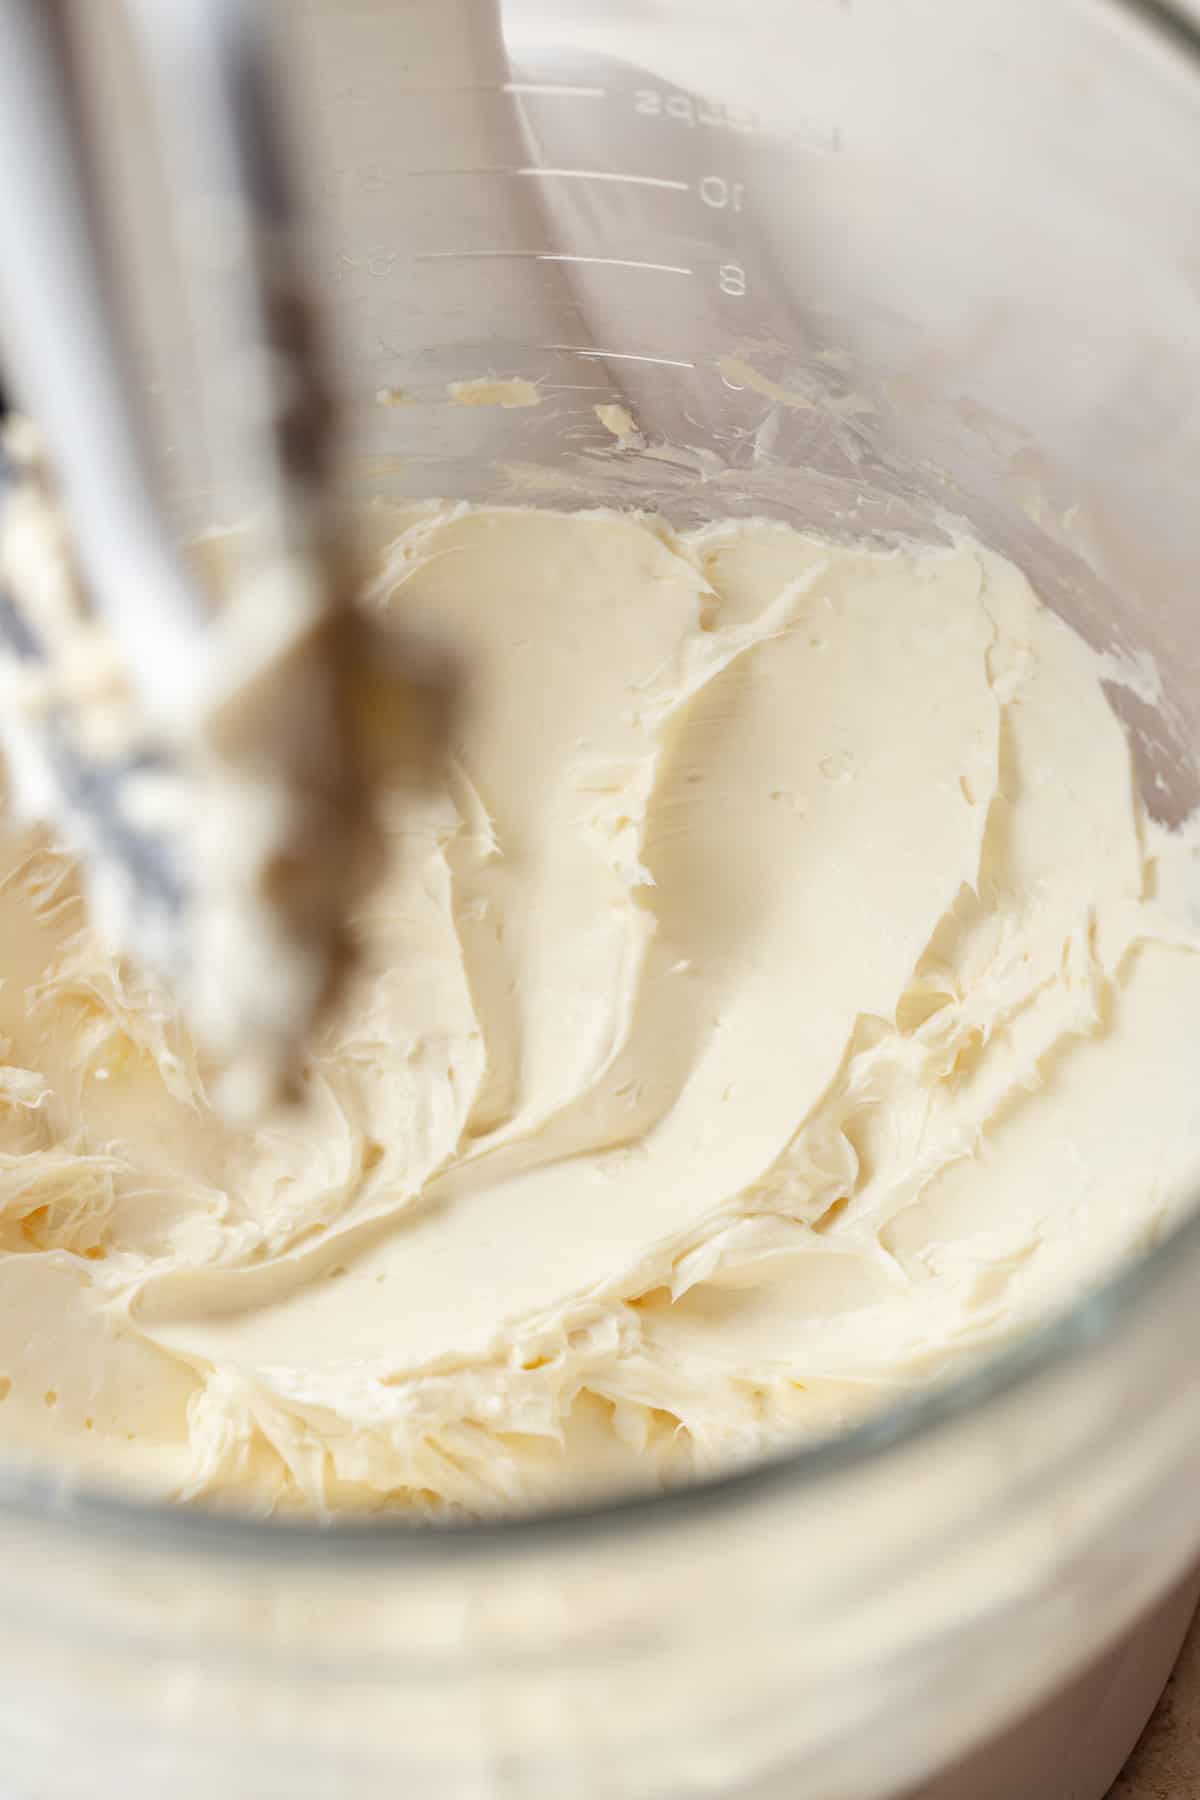 Mixed cream cheese in a stand mixer bowl.